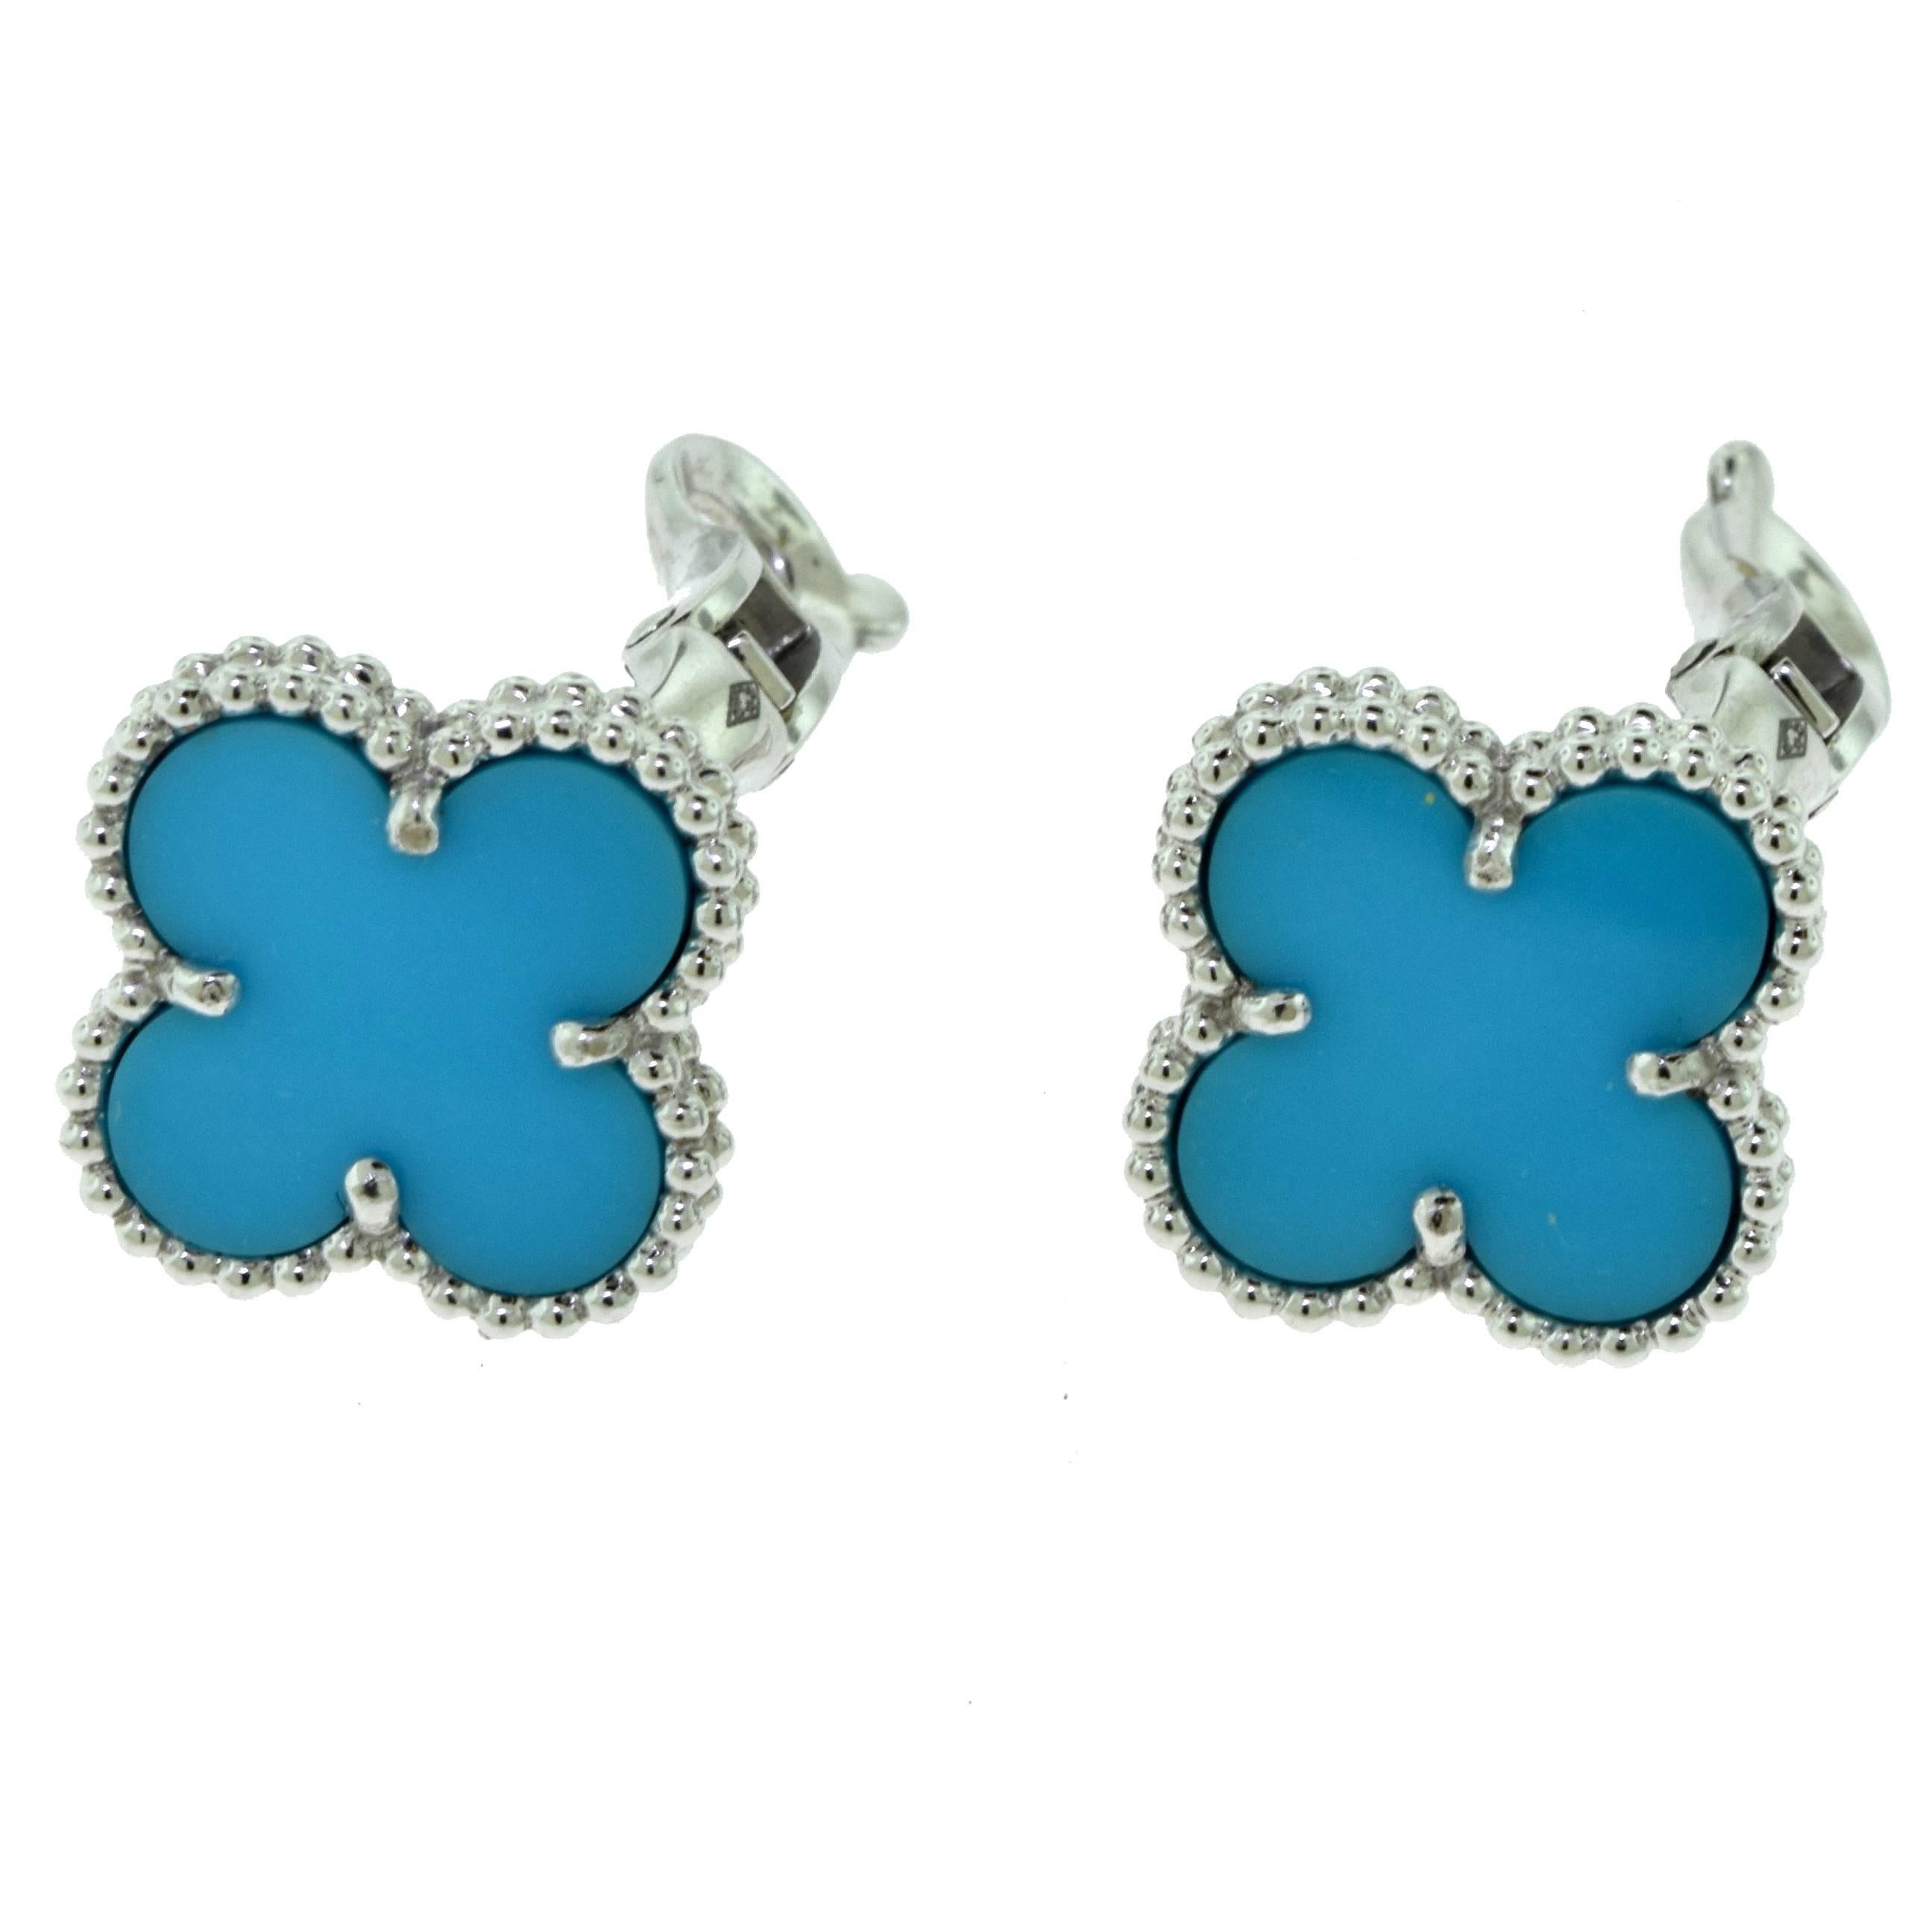 From Van Cleef & Arpel's Vintage Alhambra Collection:

Metal: 18 Karat White gold
Stones: 2 Turquoise Stones
Total Item Weight (g): 7.4
Earring Dimensions (approximate): 14.97 x 12.83mm
Hallmark: VCA Au750 Serial Number
Collateral: Certificate of